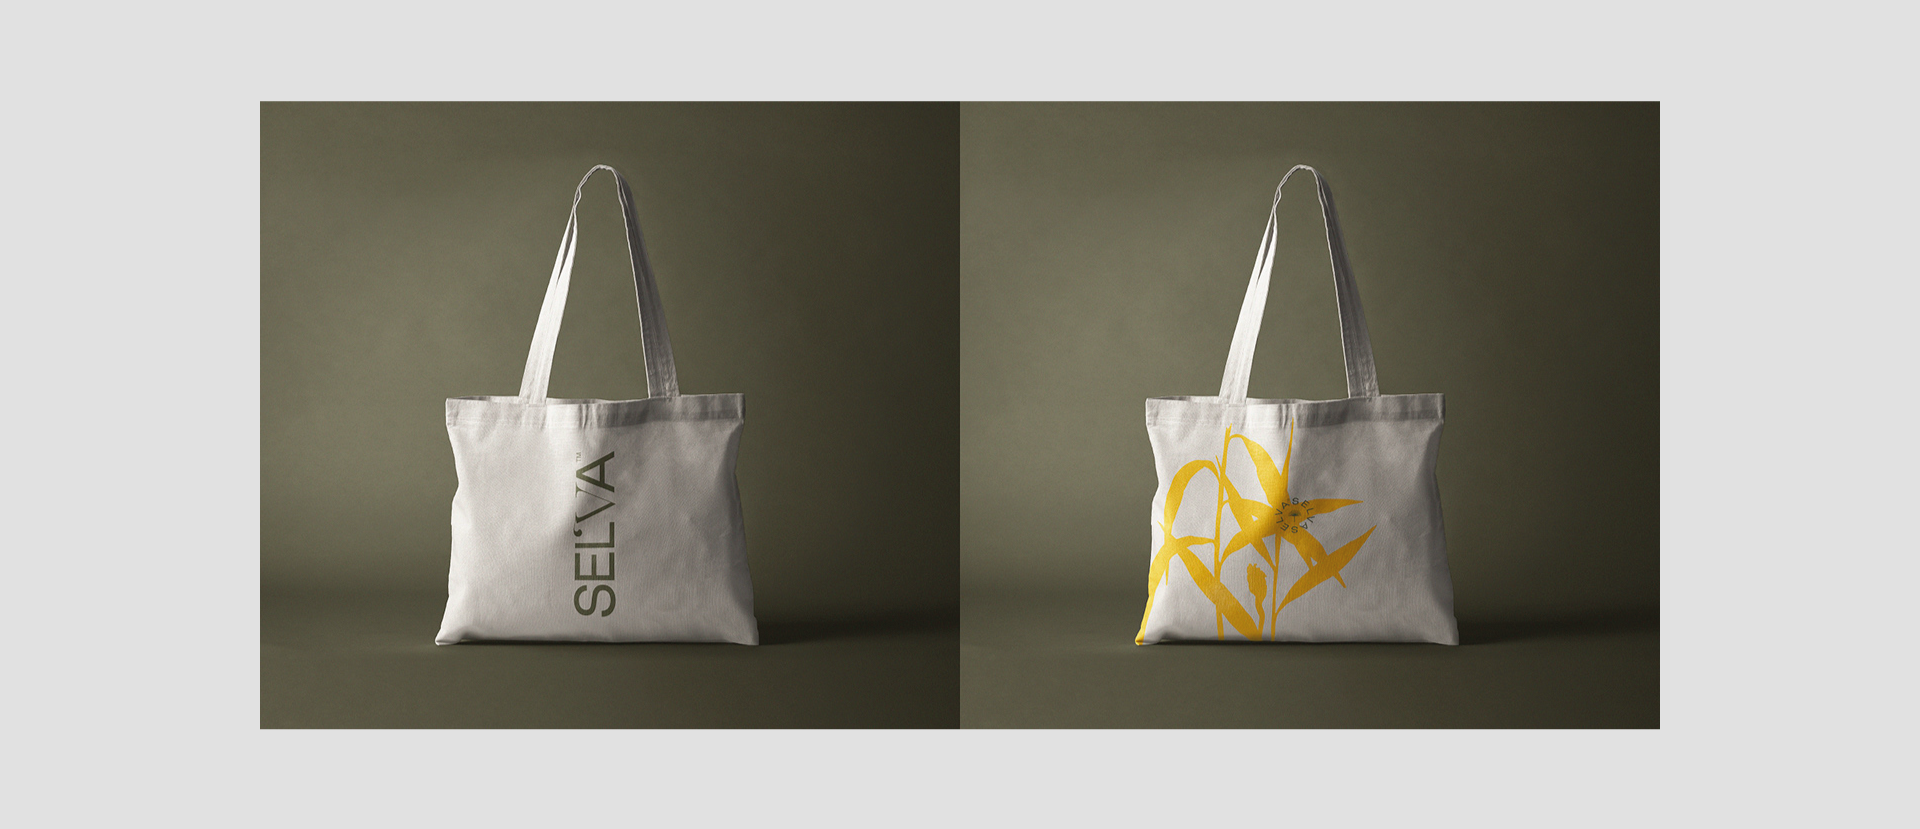 Two tote bags with Selva branding.